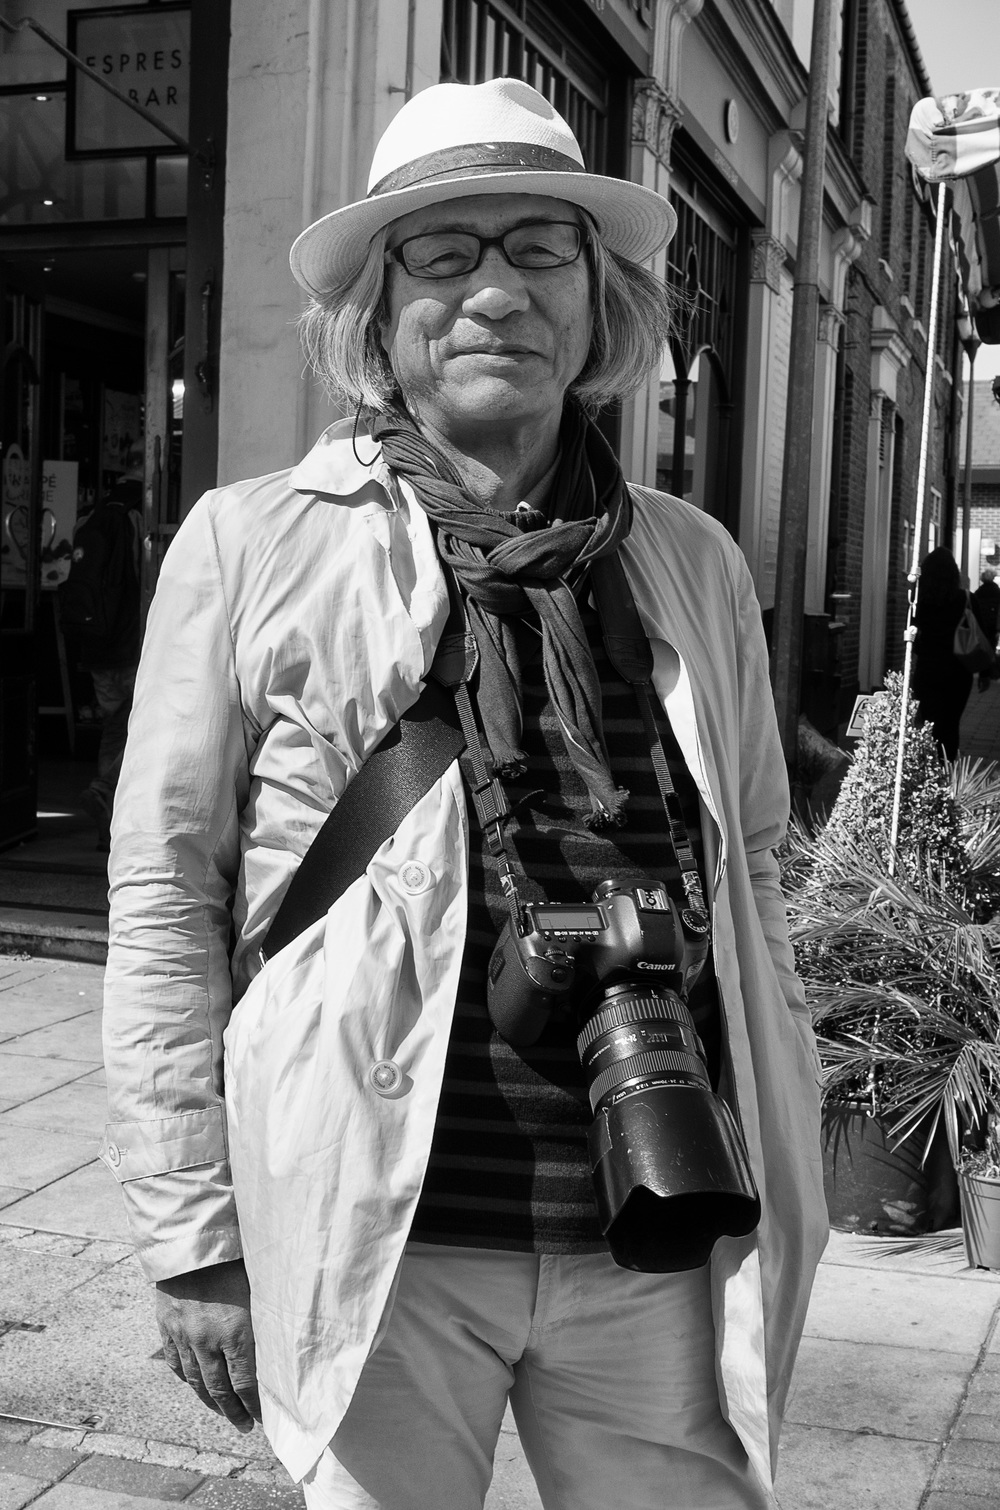  Representative from Japanese TV programme in West London: f7.1 @ 1/125s, ISO 100 